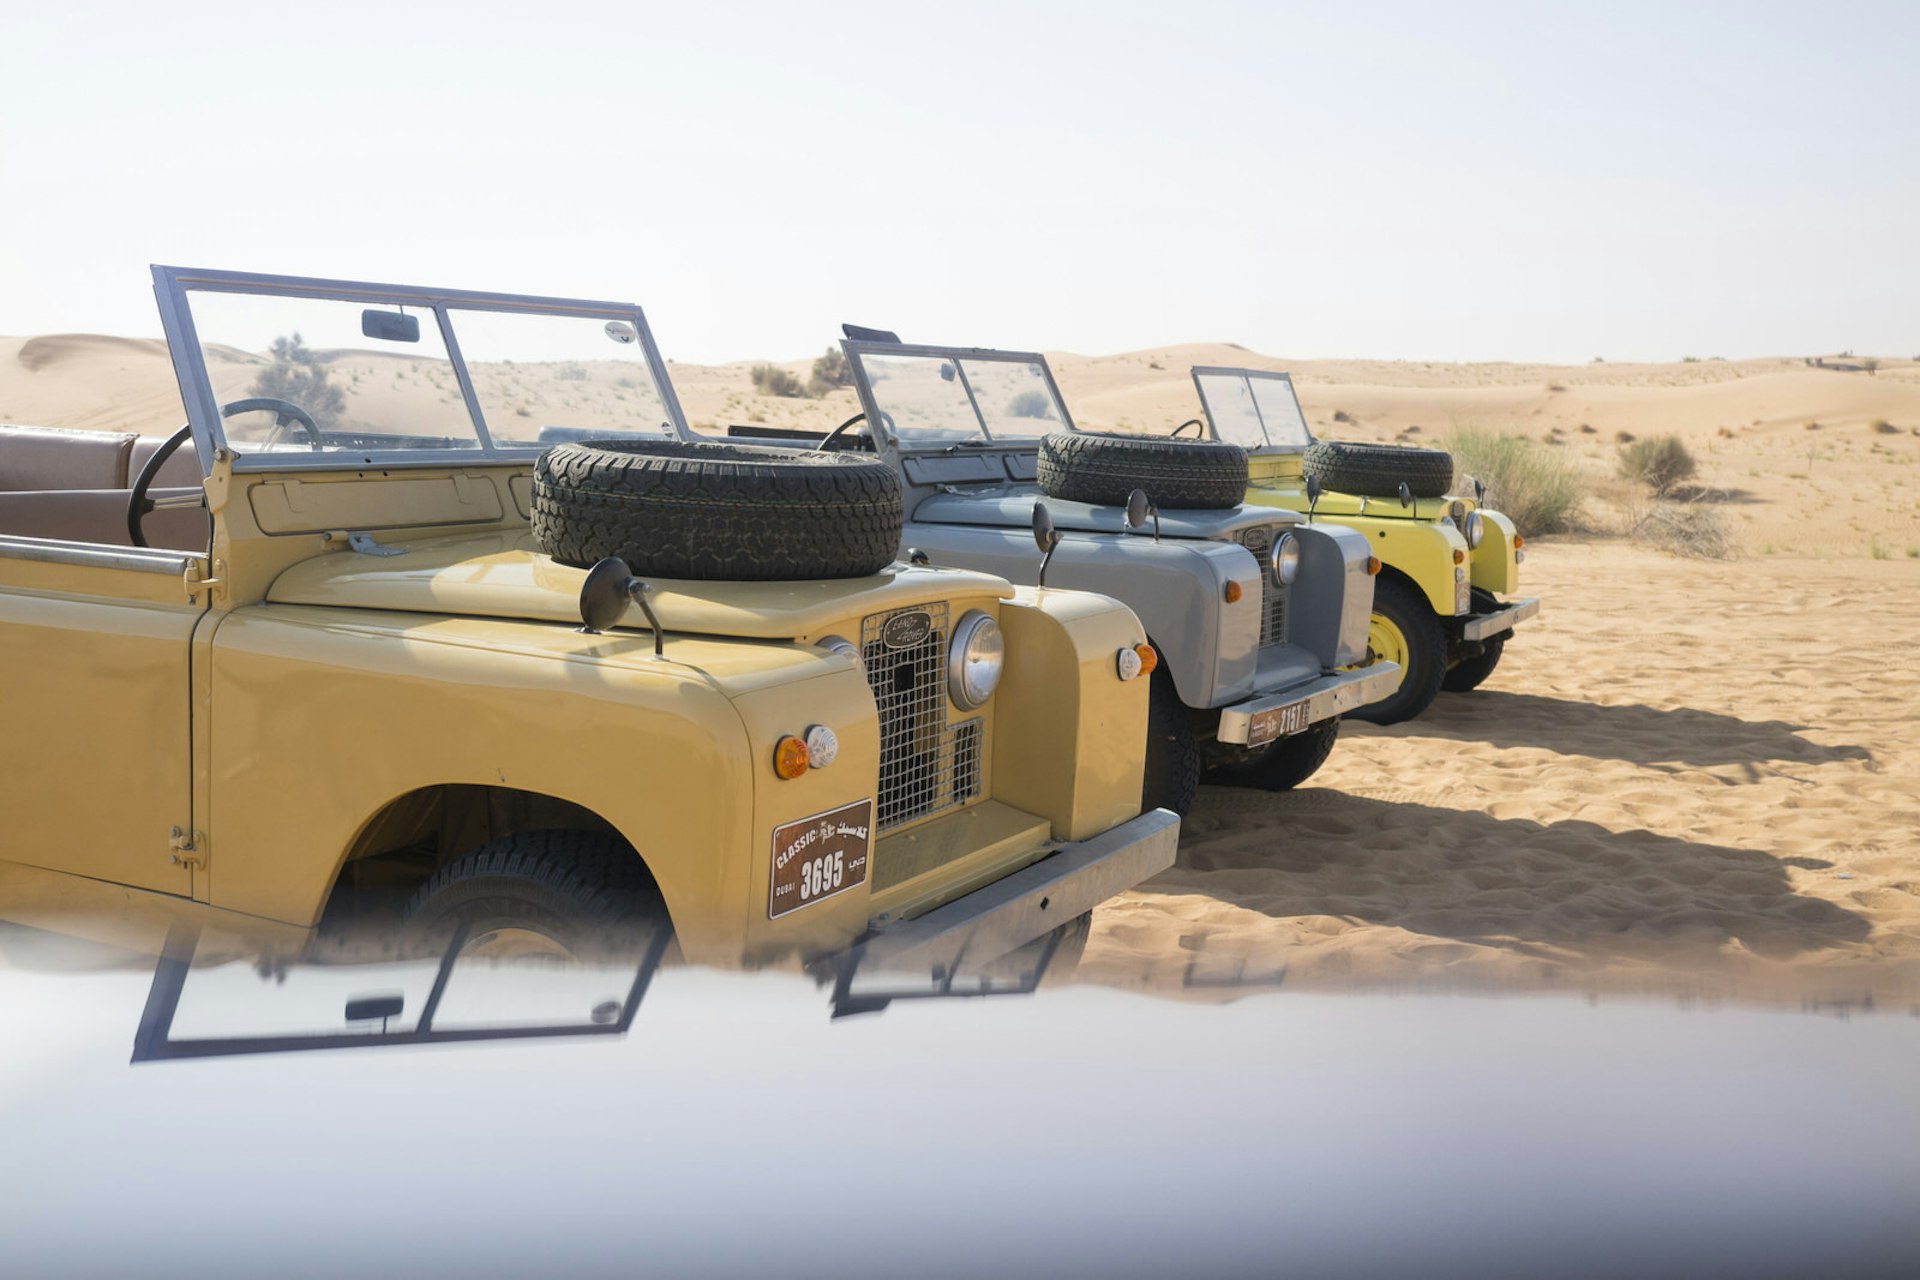 Cars line up in the Dubai desert before a hot-air balloon ride © Lisa Michele Burns / Lonely Planet